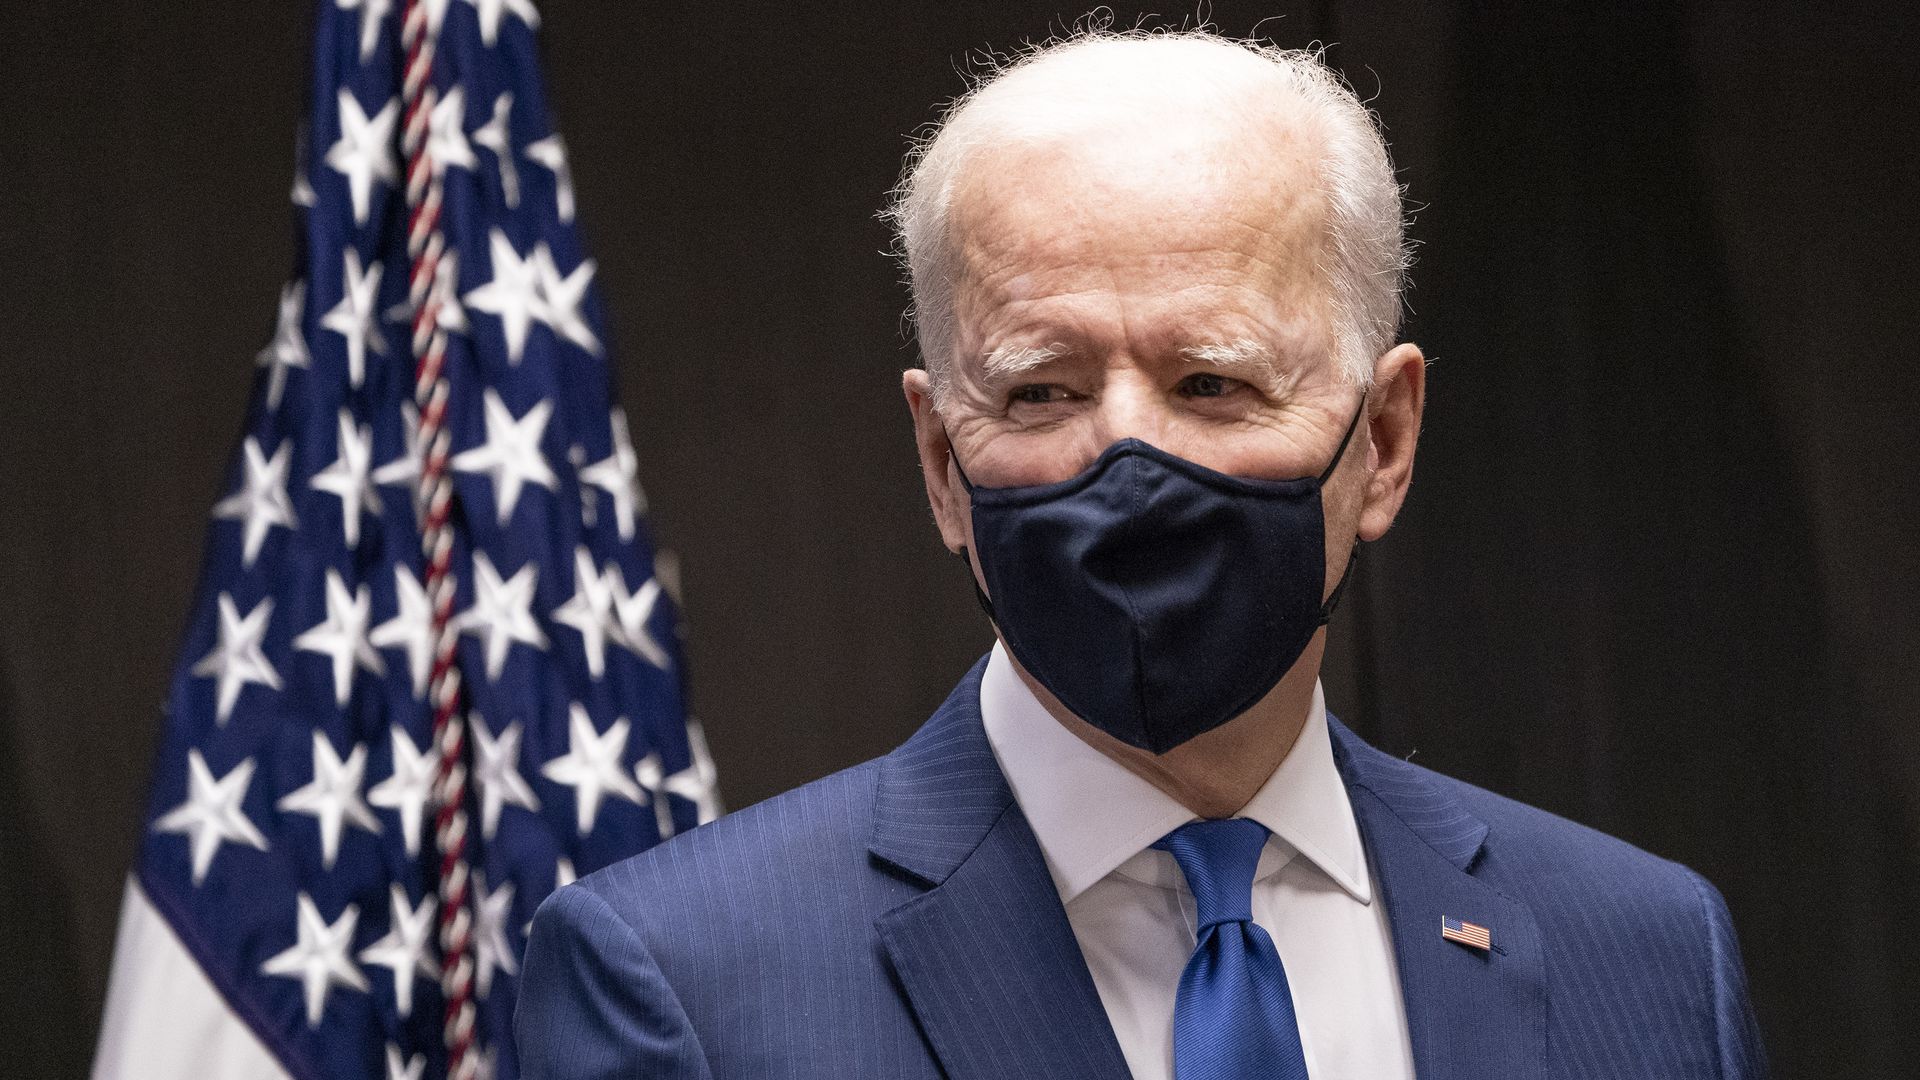 Picture of Biden wearing a black face mask and standing next to an American flag